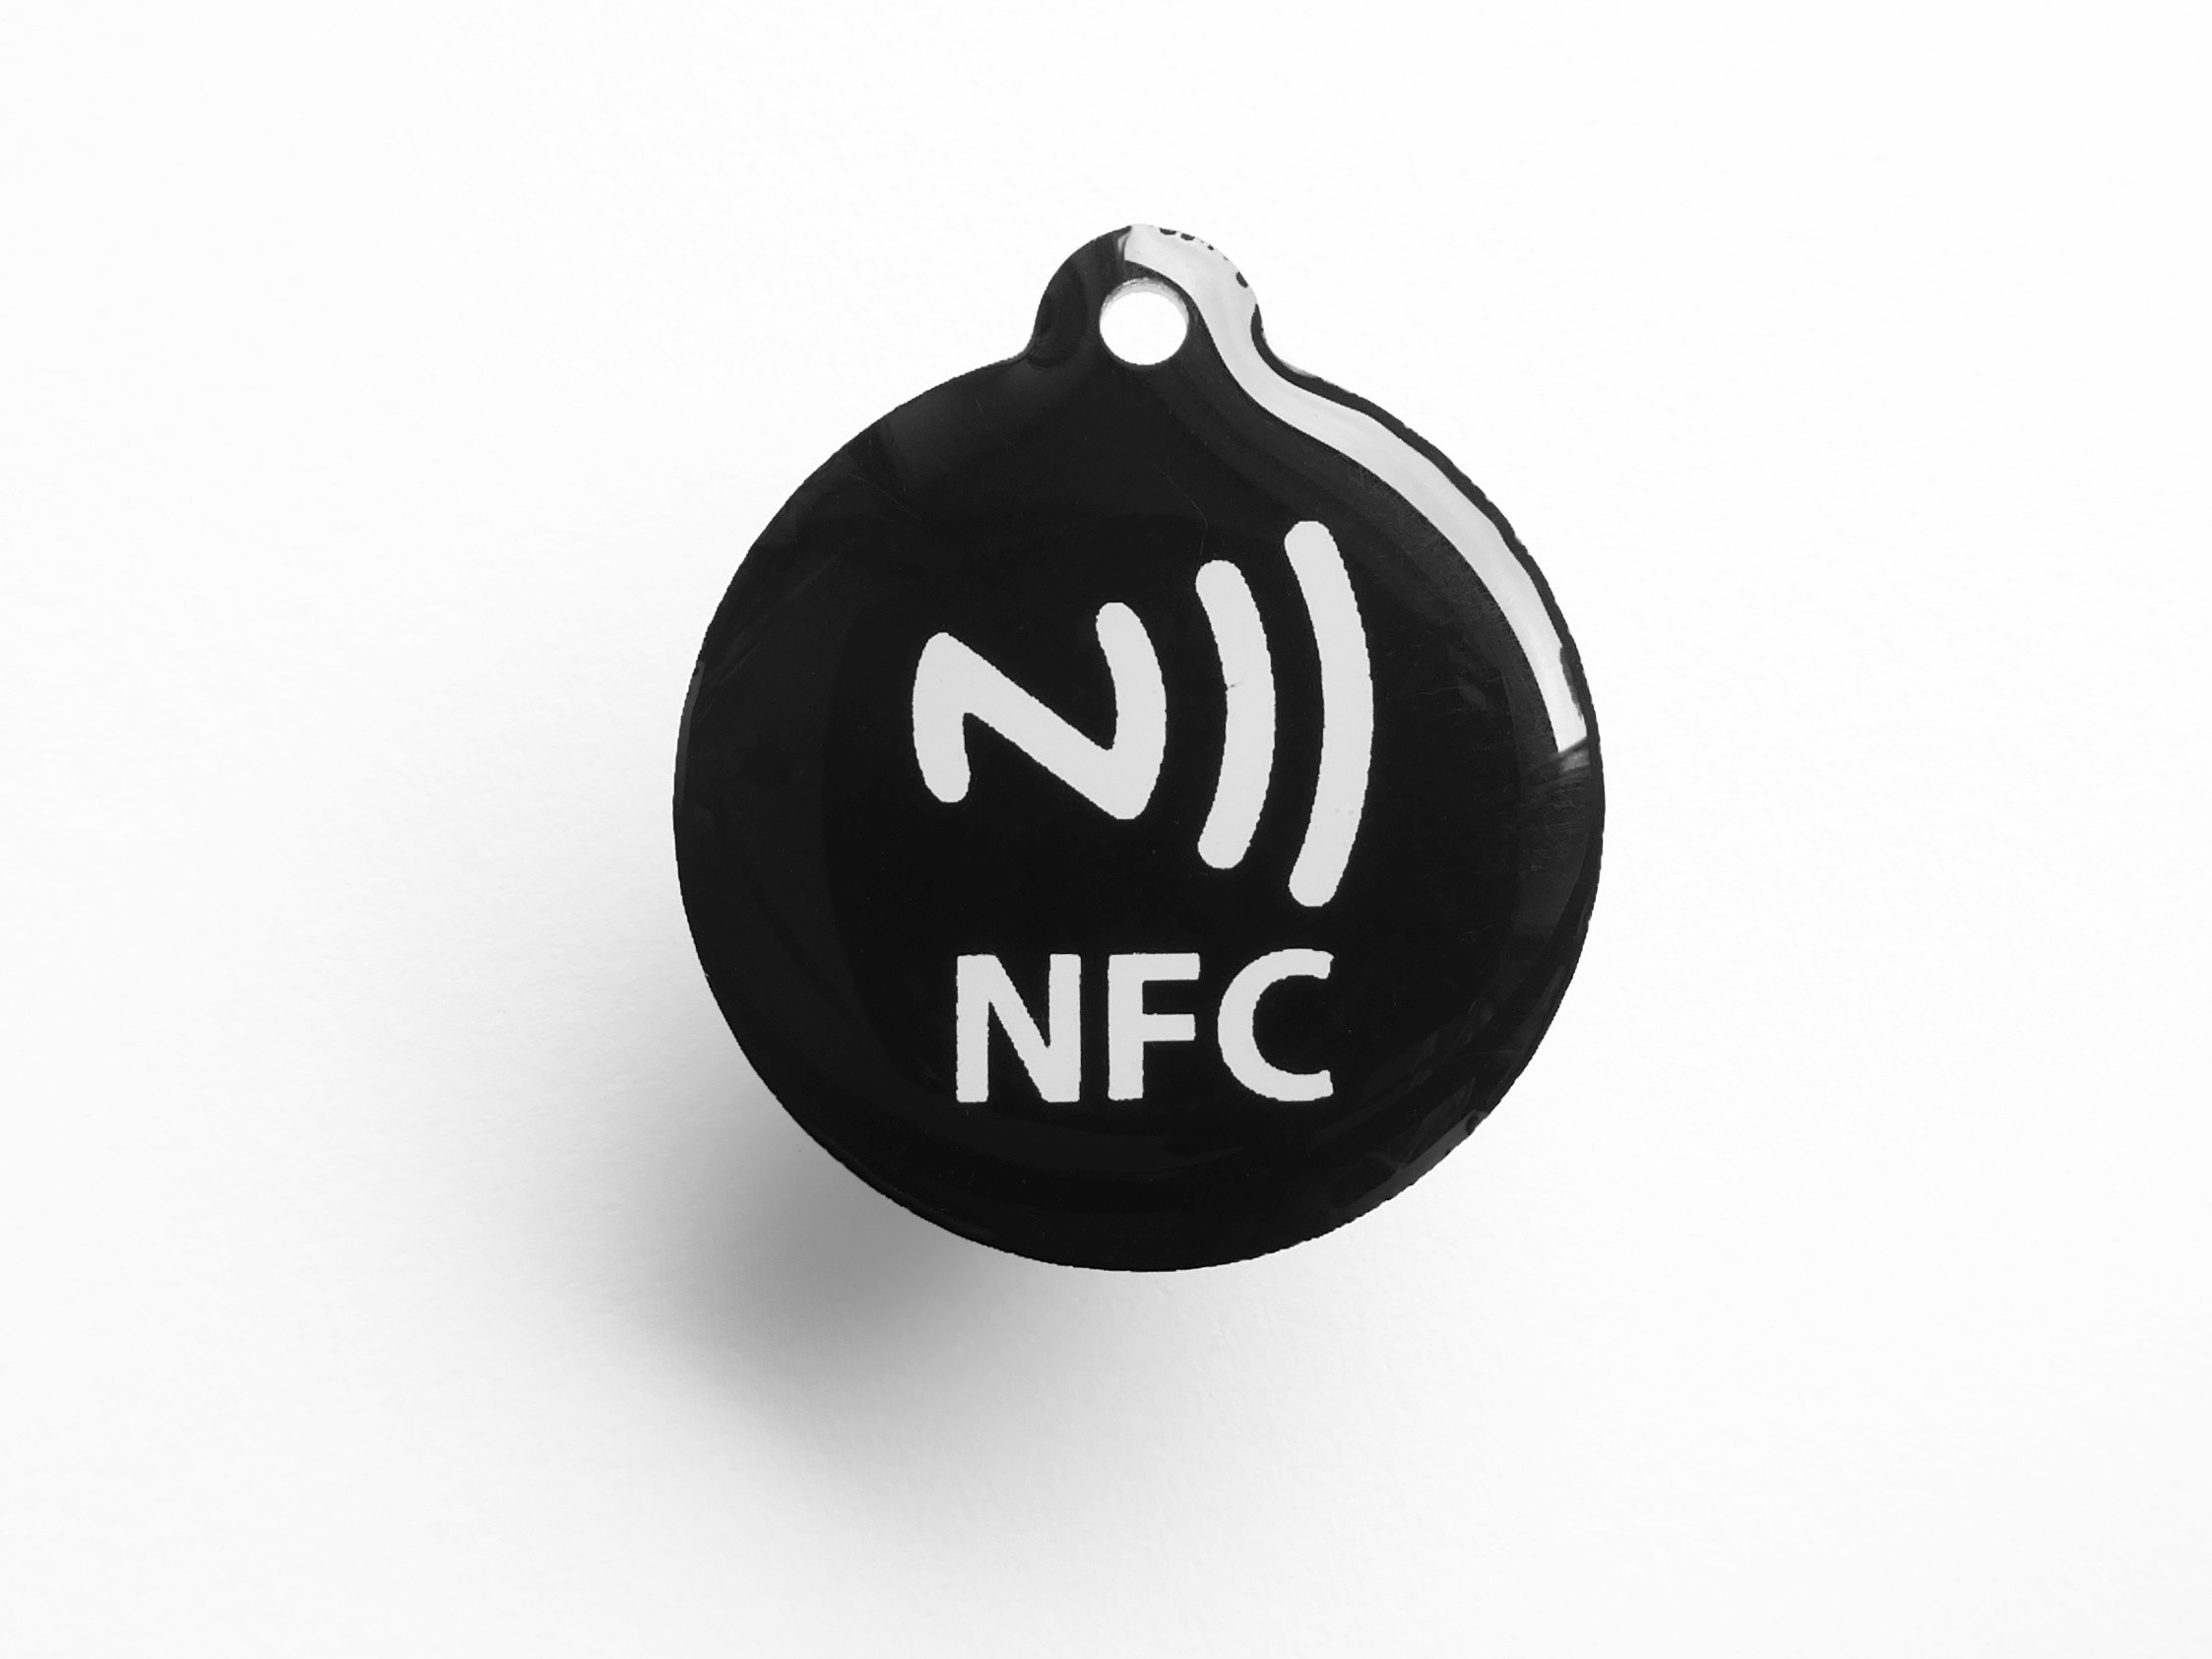 Working with NFC tags on Android